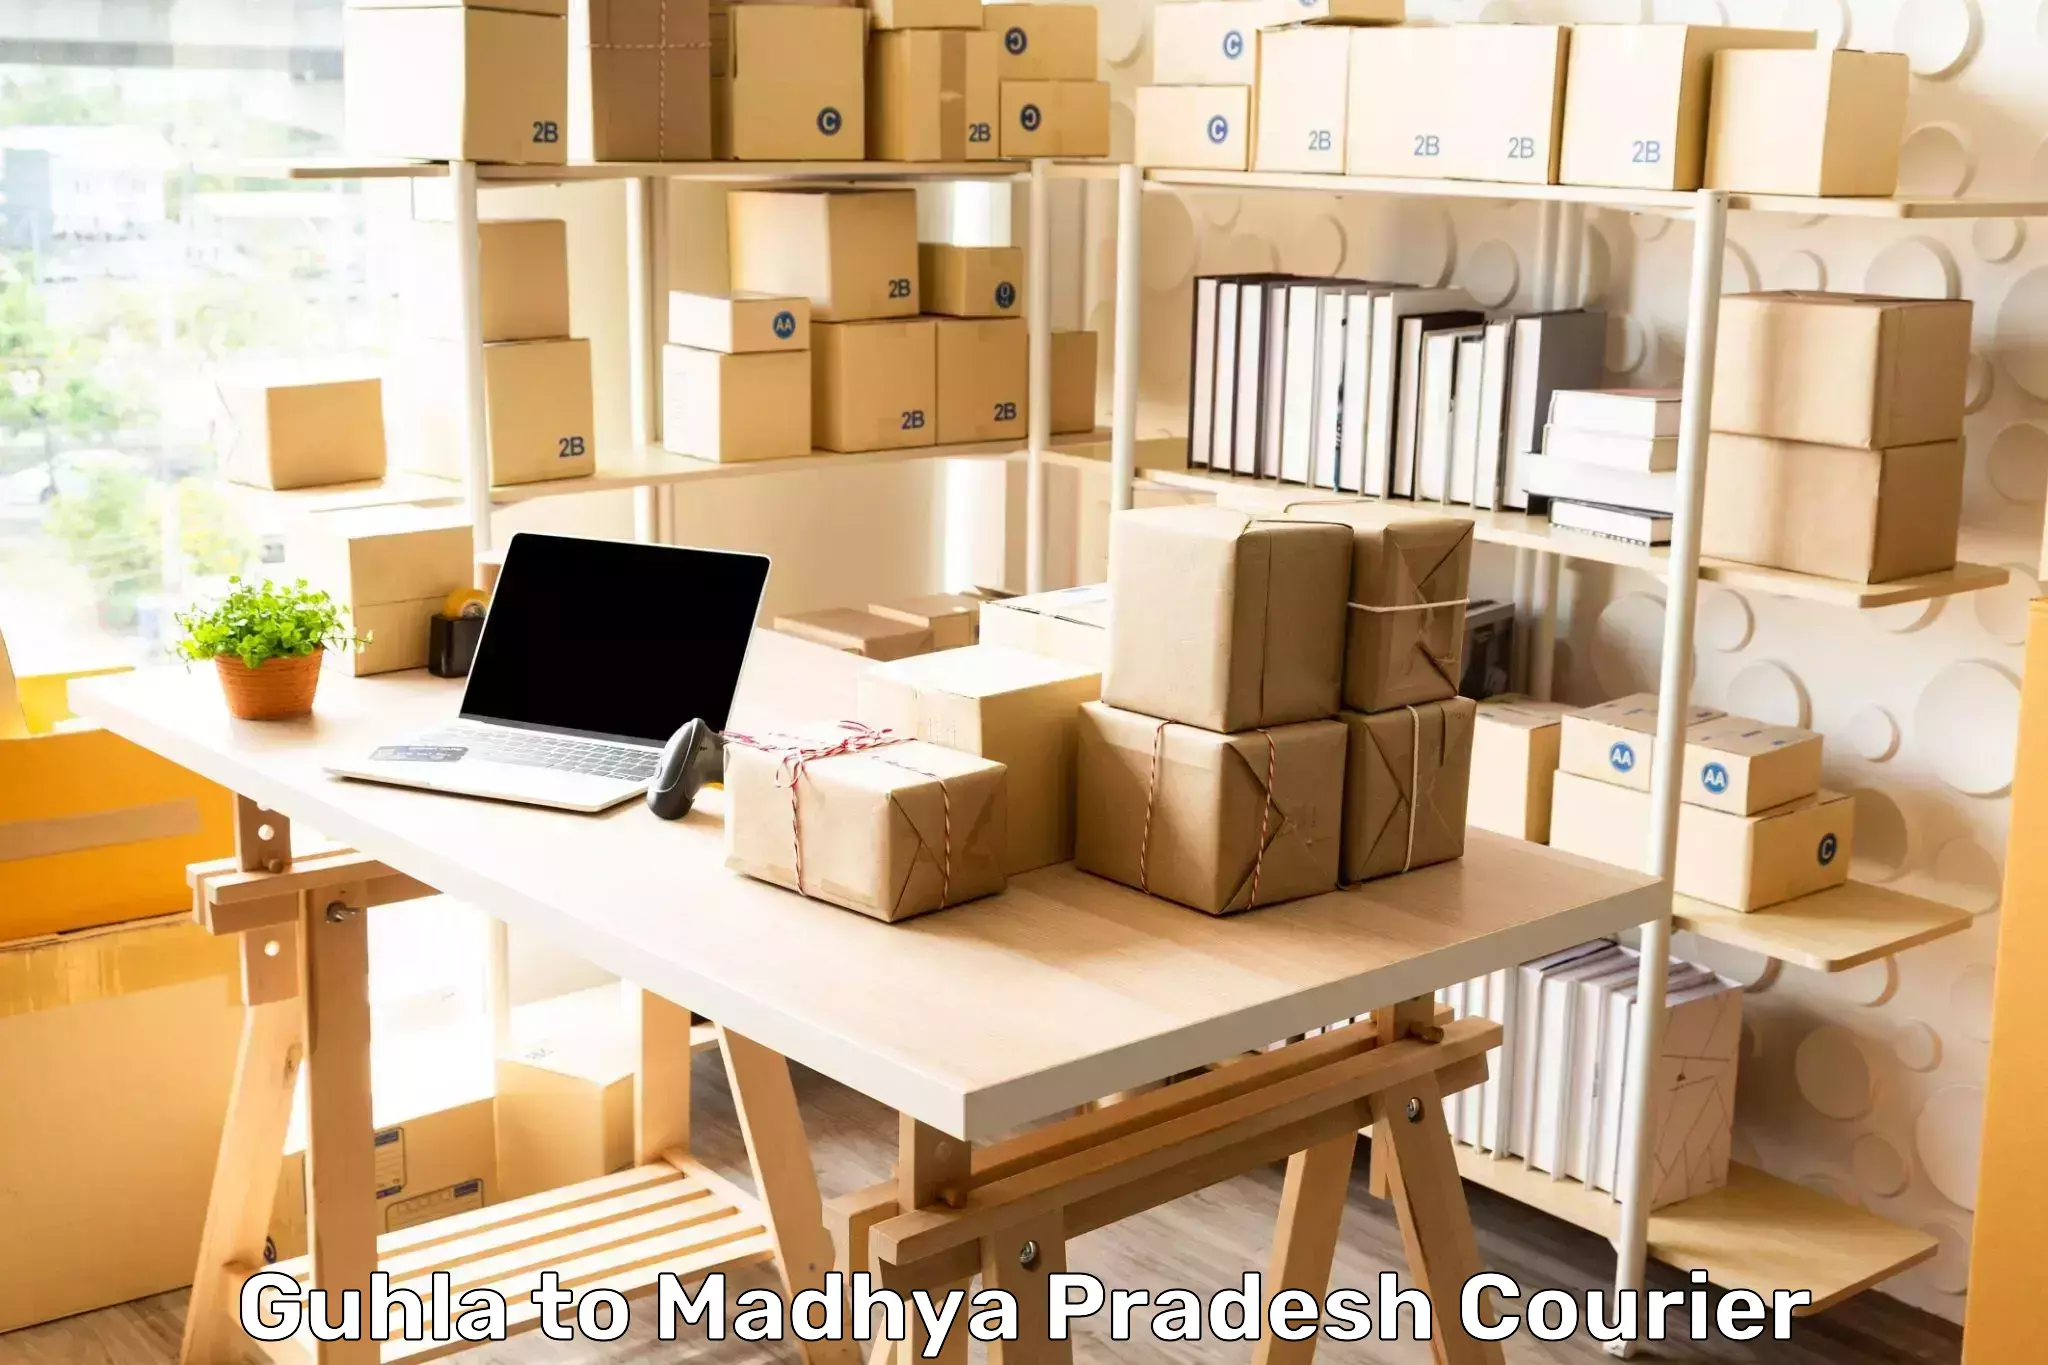 Business logistics support in Guhla to Gotegaon